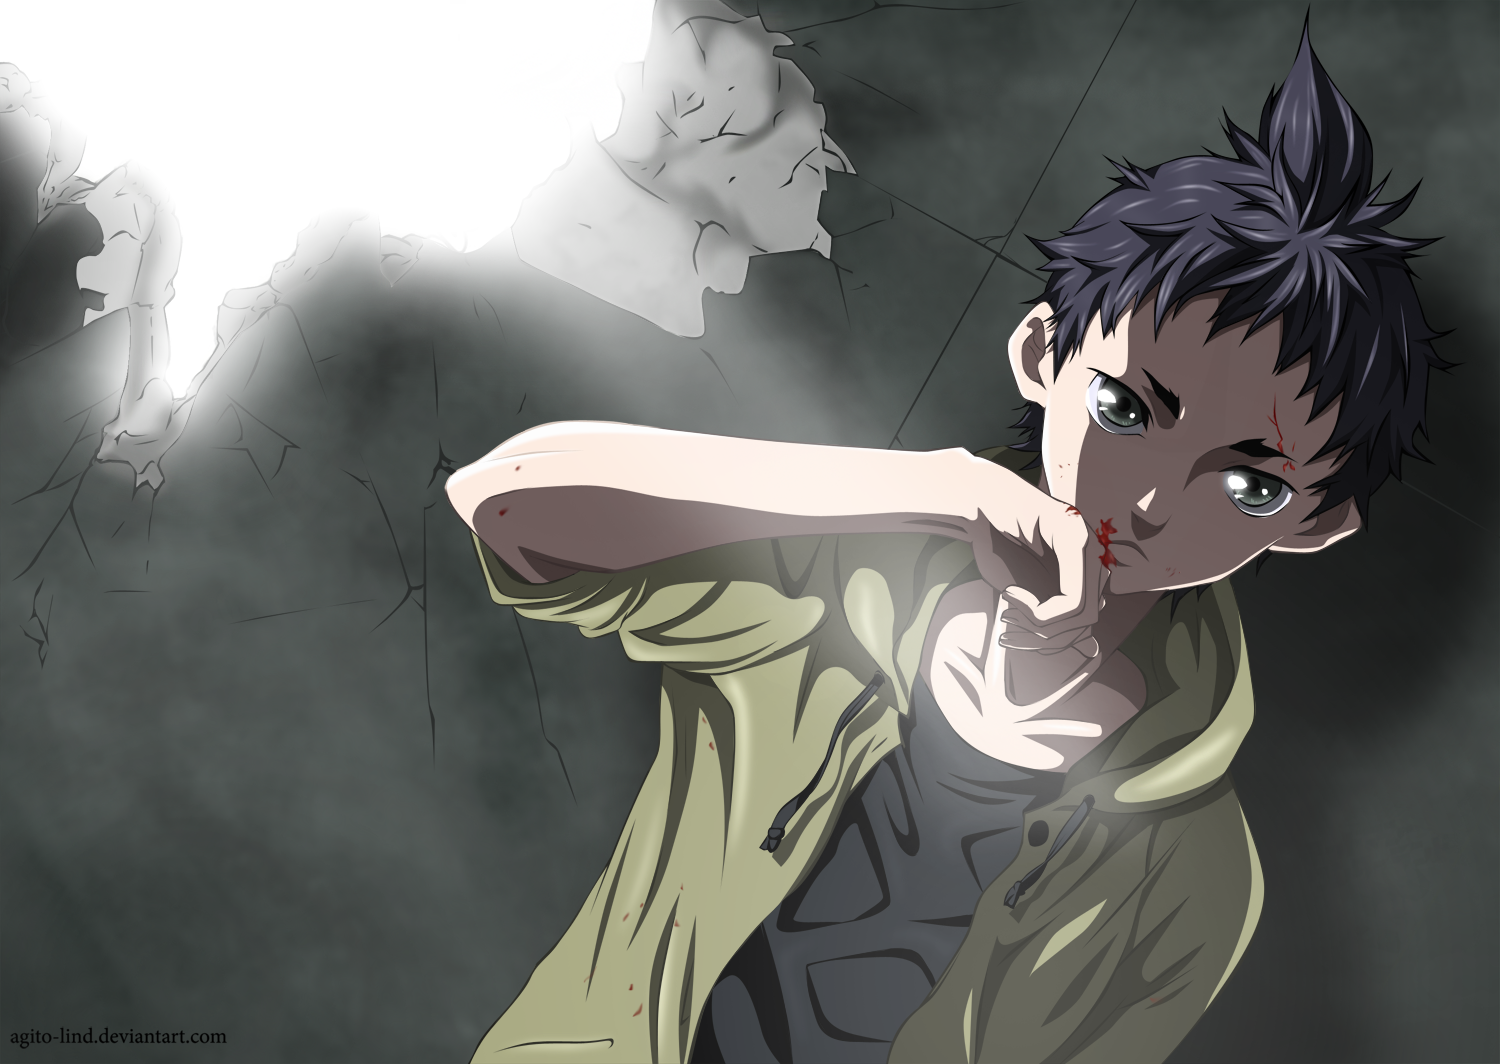 Why was the last episode of Deadman Wonderland so pointless and  frustrating? - Quora